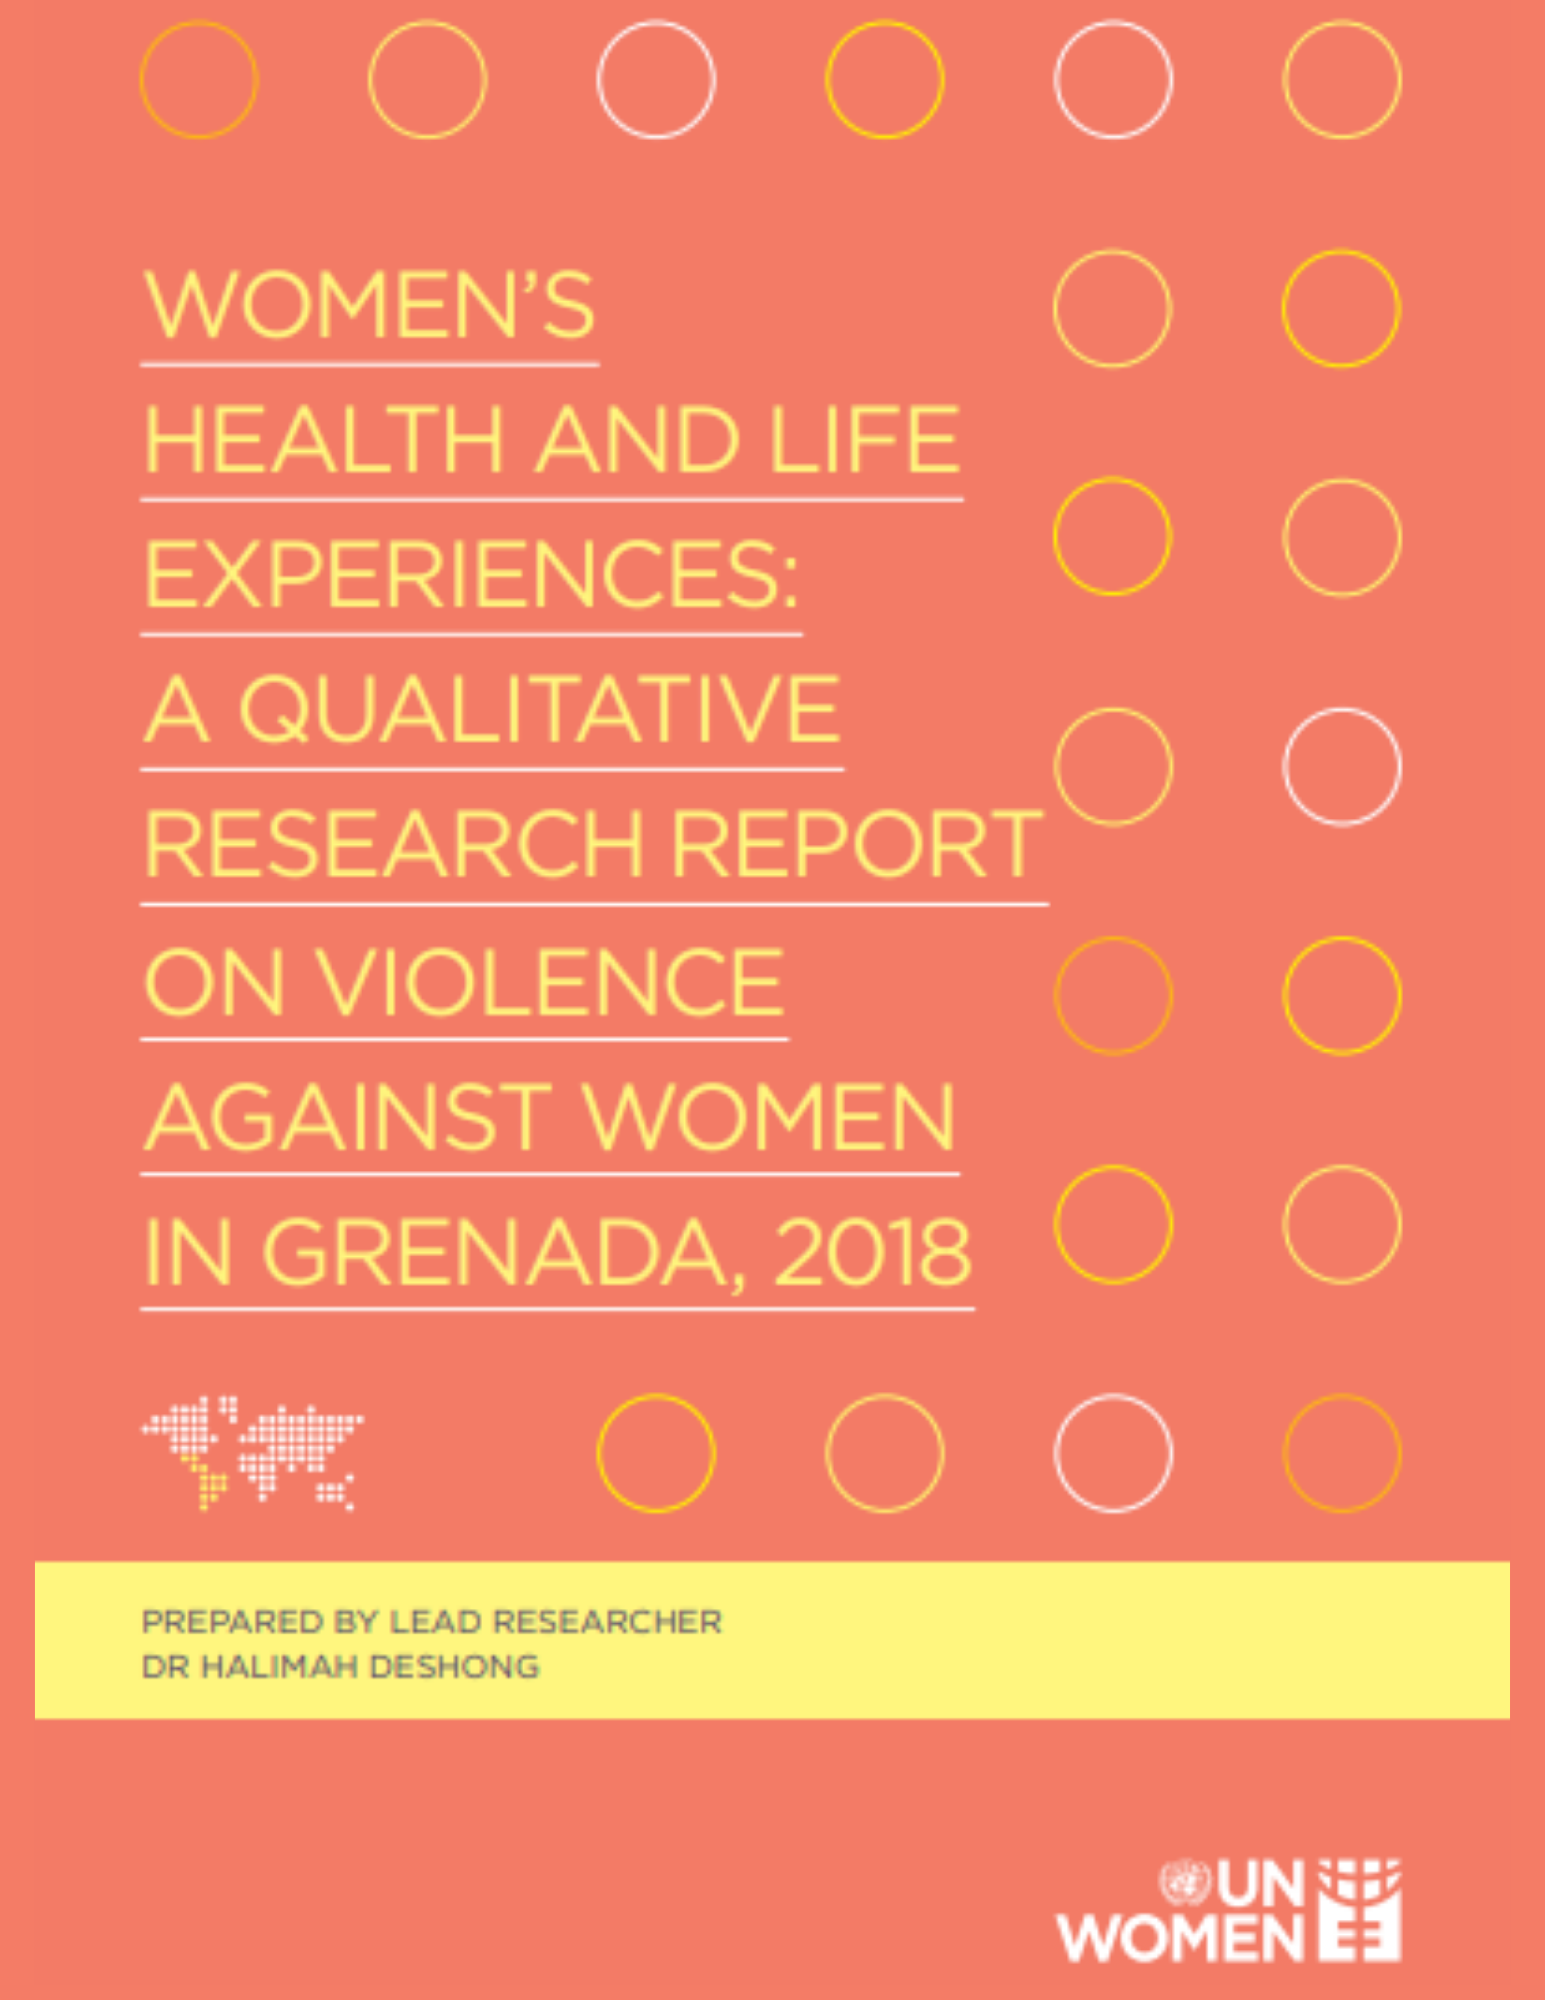  Women’s Health and Life Experiences: A Qualitative Research Report on Violence Against Women in Grenada, 2018